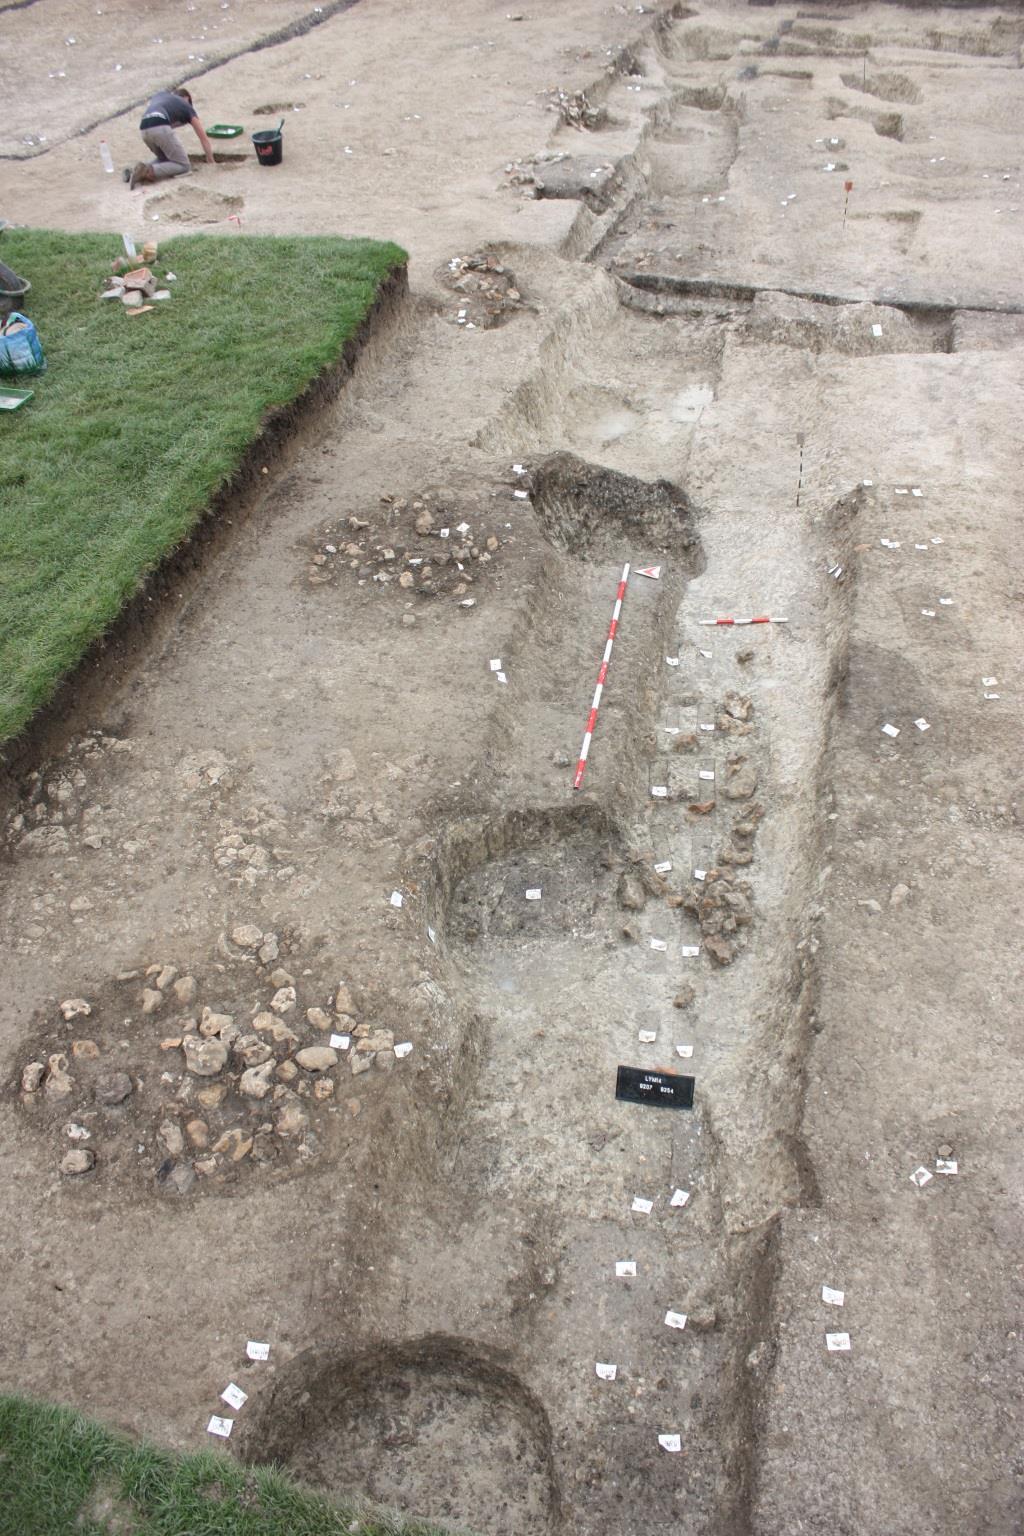 foundation trench dug for the first phase of the building appears to have been retained for subsequent phases.